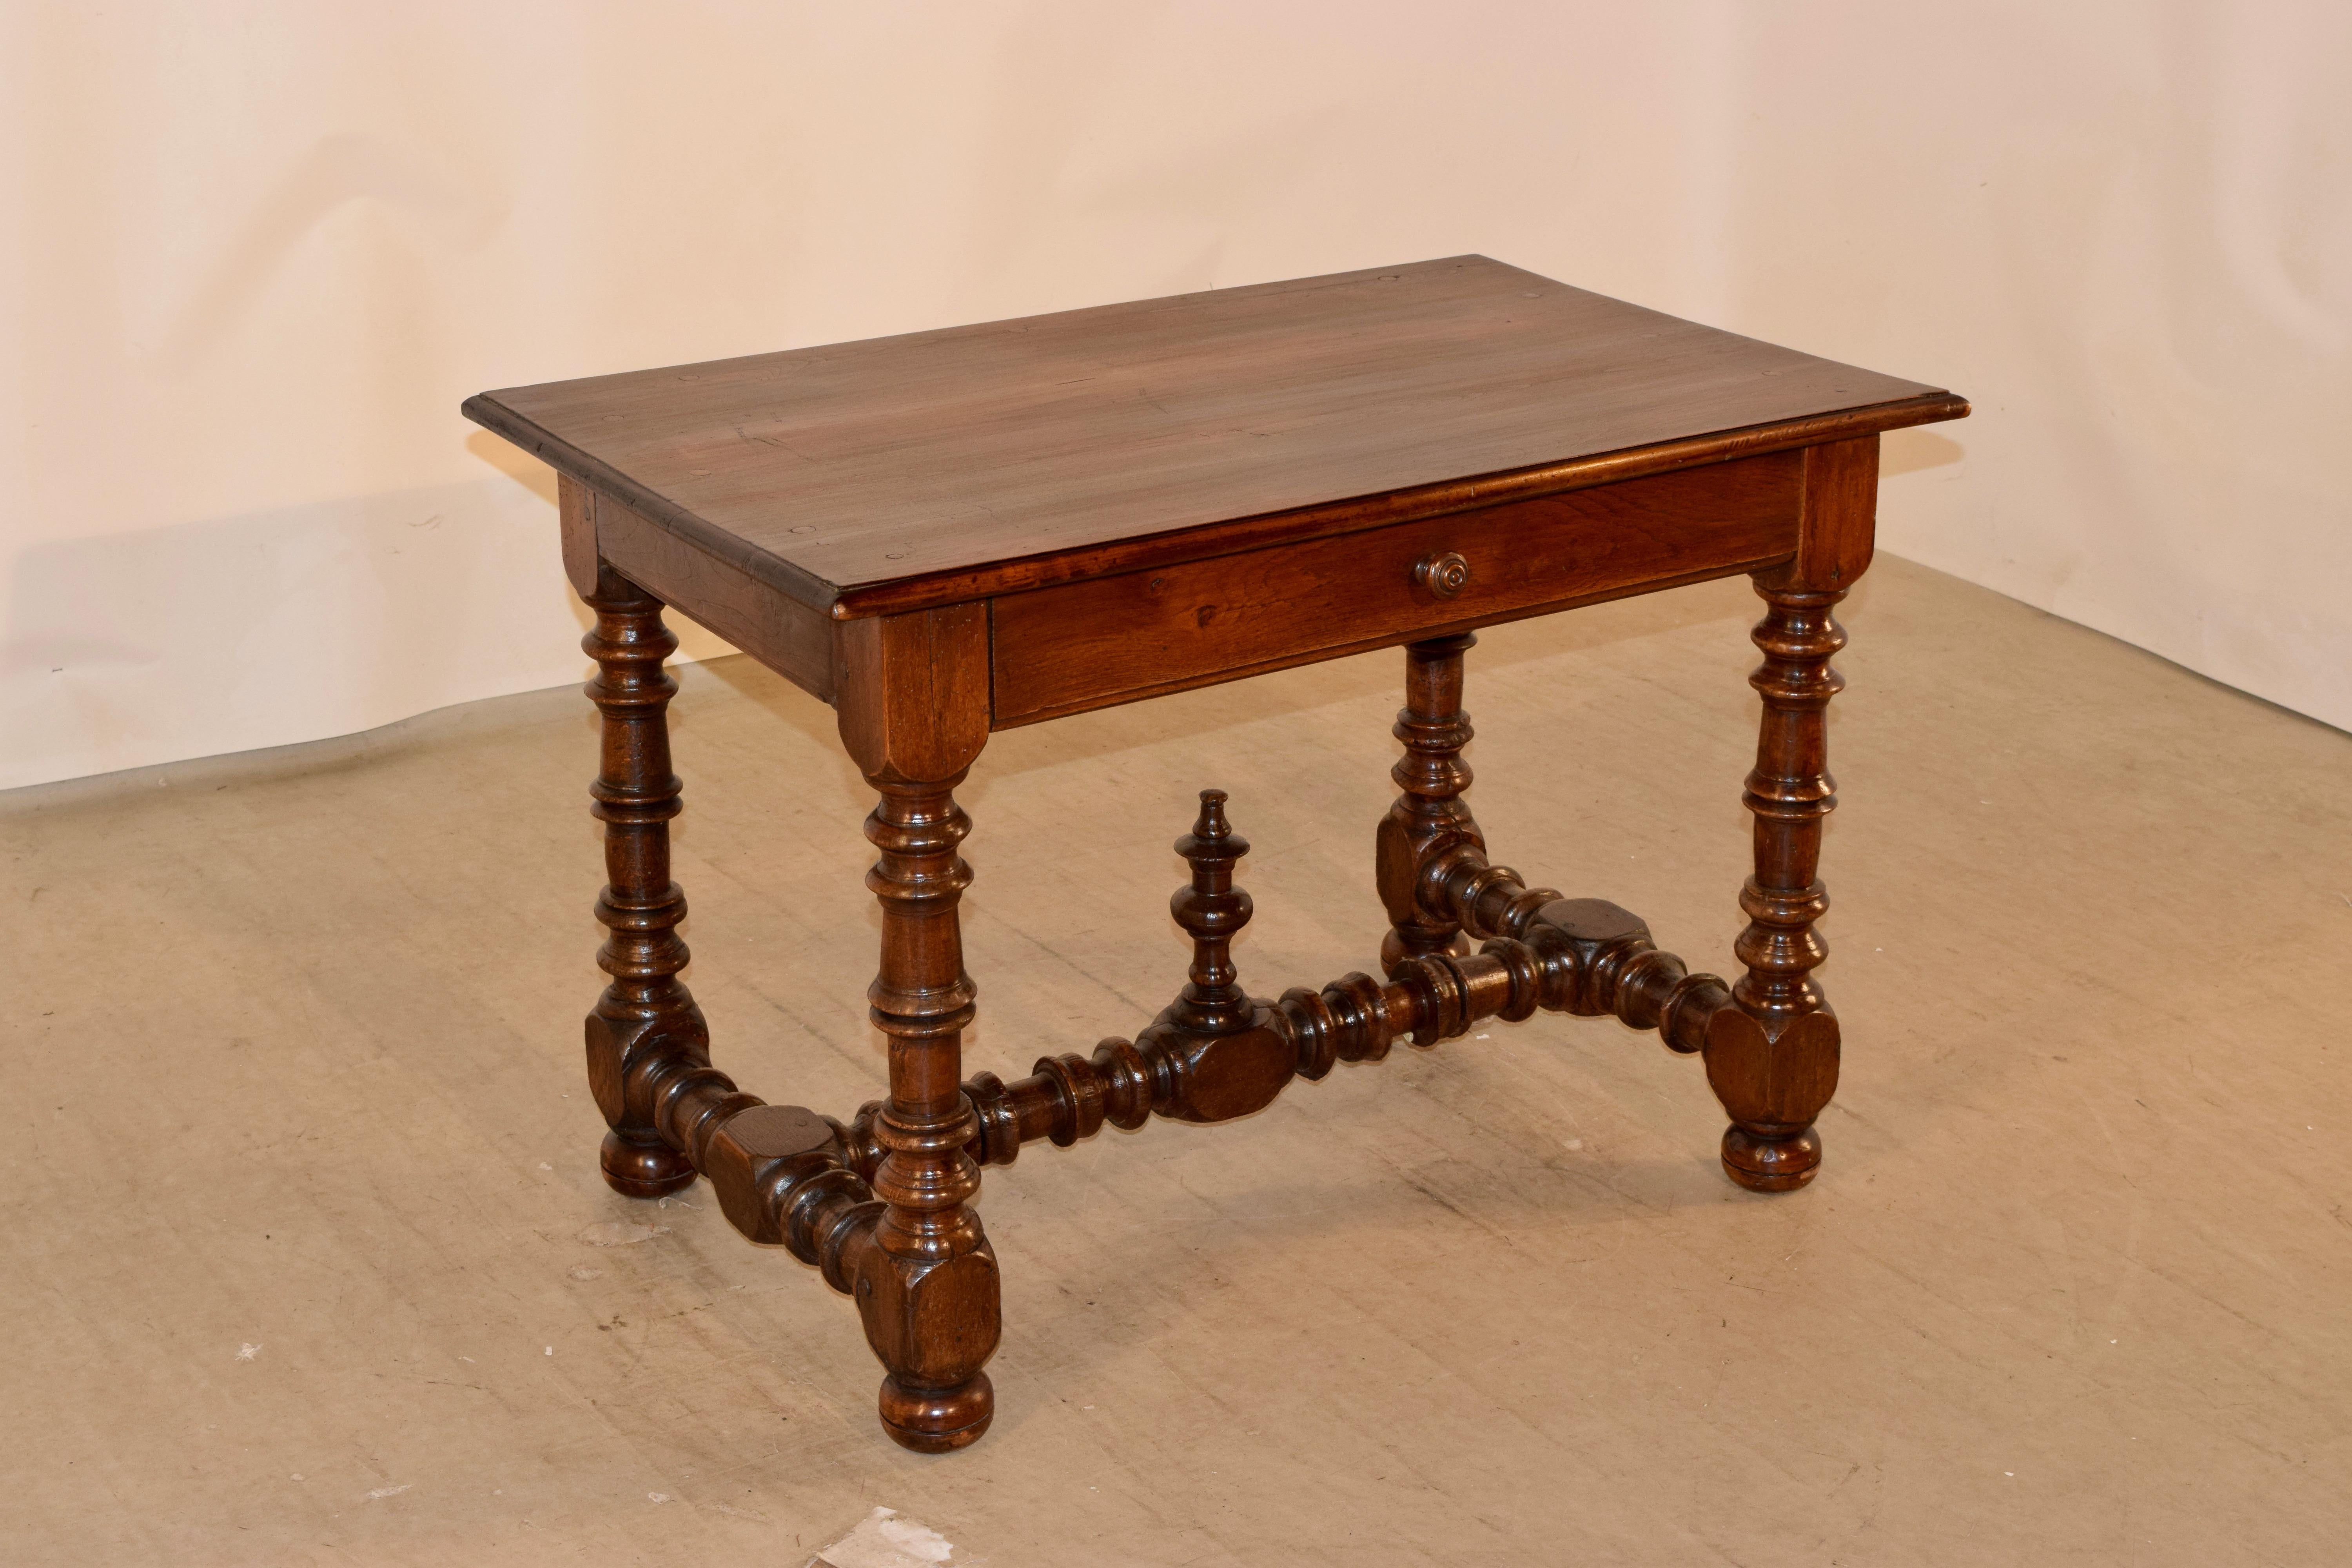 19th century walnut side table from France with a wonderfully grained four board top which has pegged construction and a beveled edge. This follows down to a simple apron with a single drawer in the front. The apron is finished on all four sides for